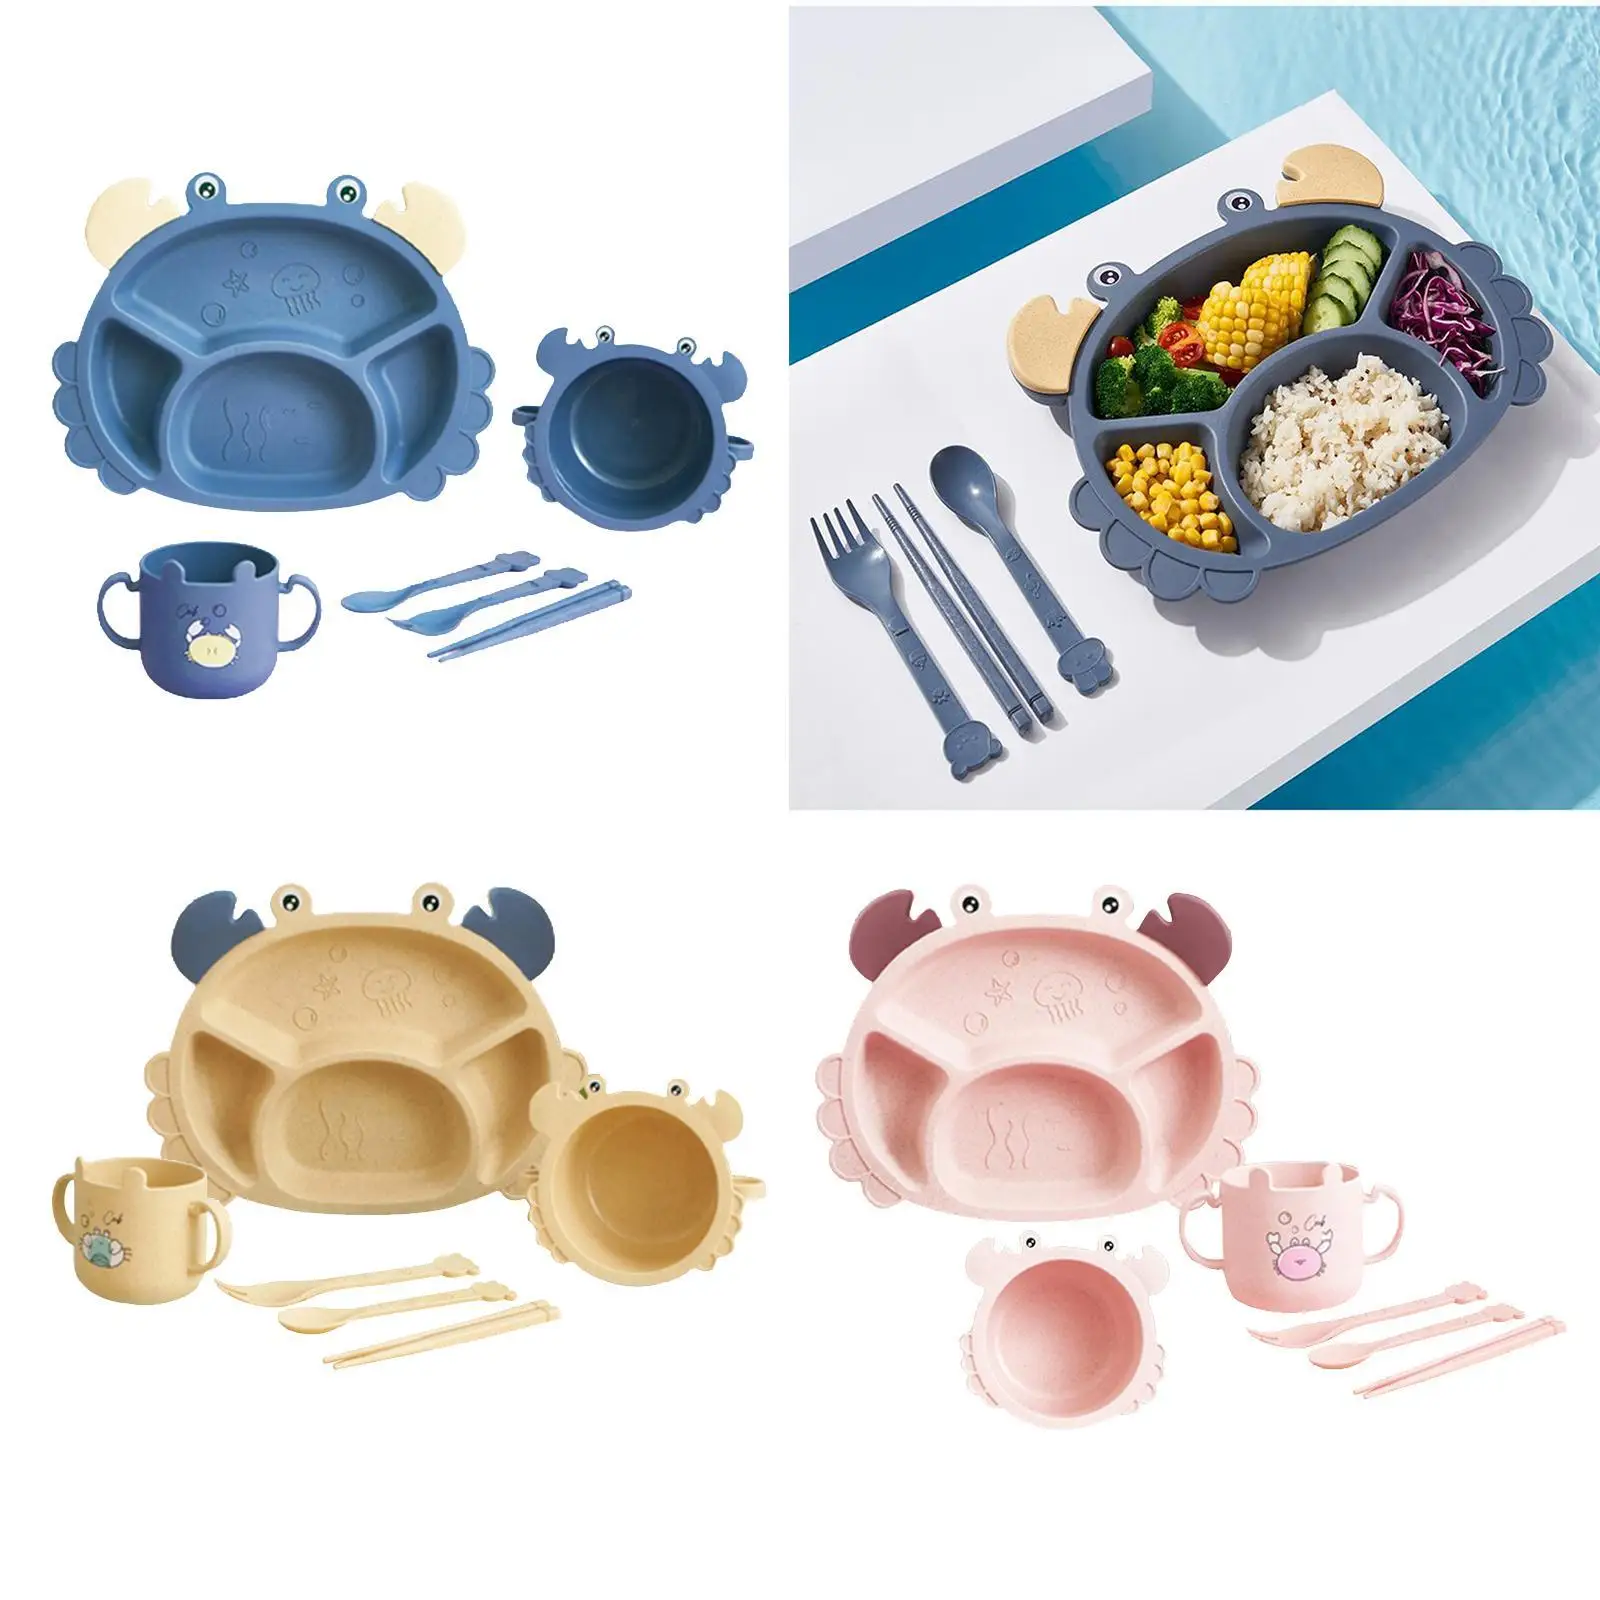  Toddler  Wheat Straw Cute Bowl Set Household Meal  Self Feed Training Divided   Set for Toddler Baby Dishes Utensils